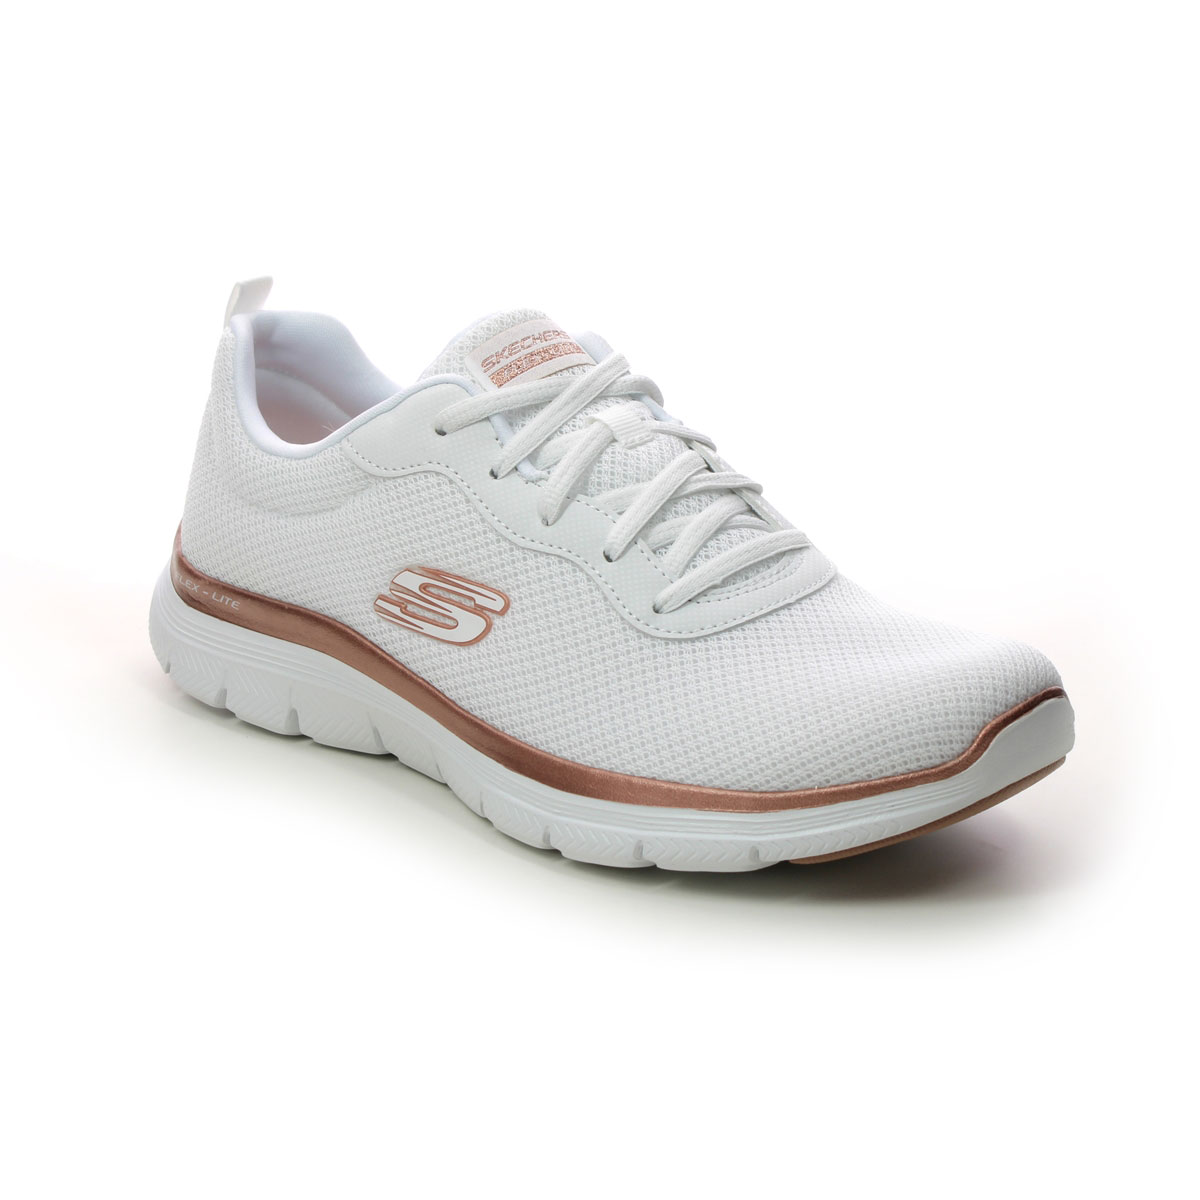 Skechers Flex Appeal 4.0 White Rose Gold Womens Trainers 149303 In Size 5 In Plain White Rose Gold